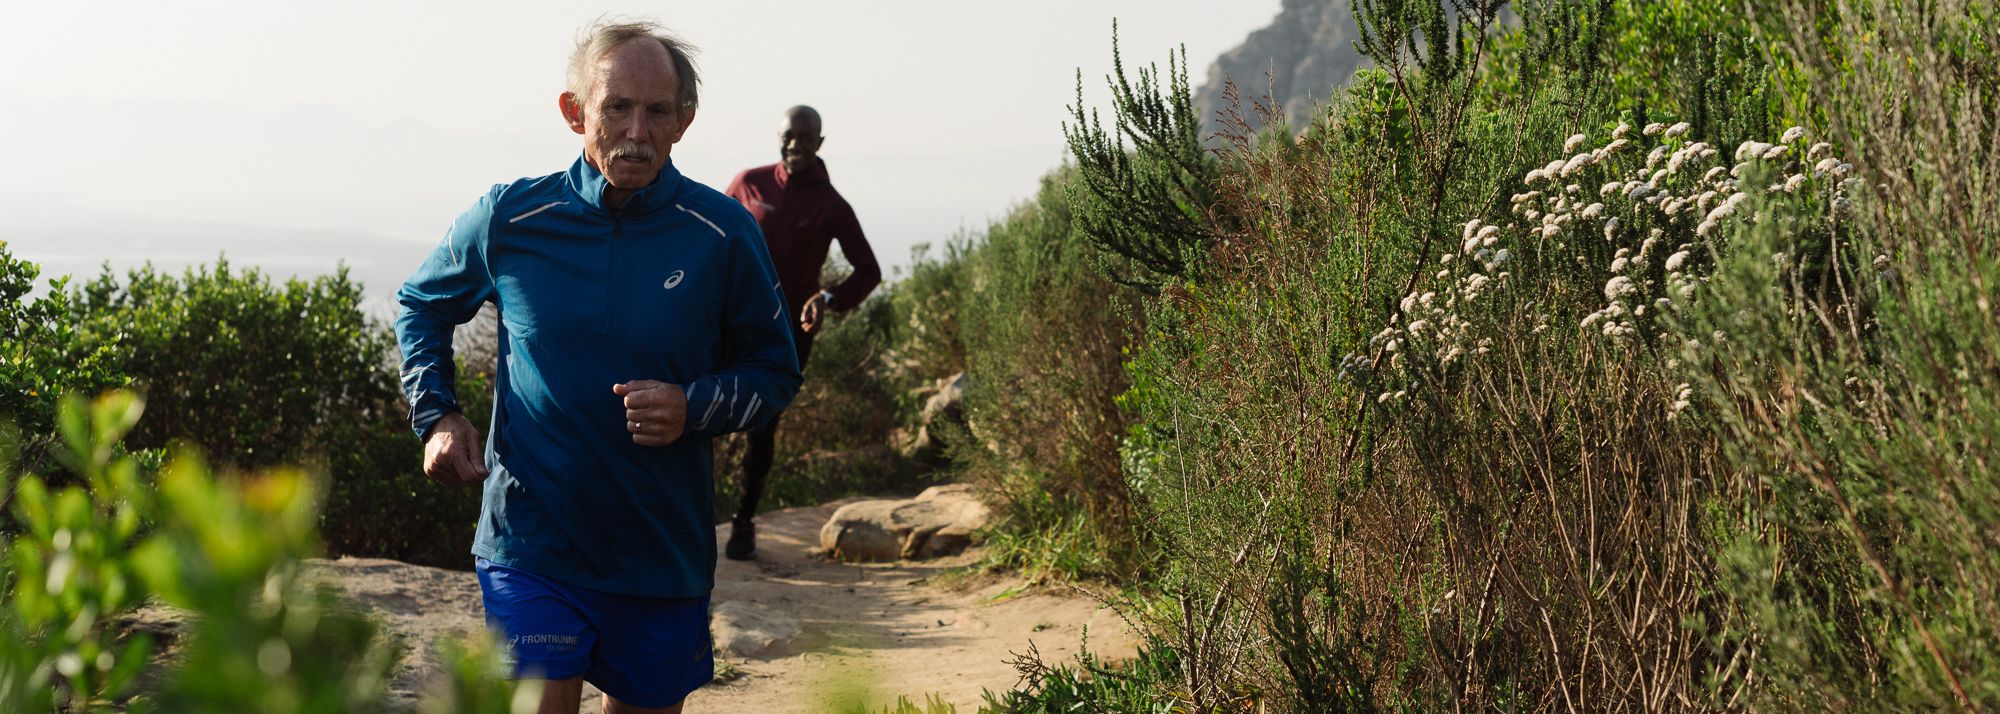 What is the key to running well and enjoying it as you age?